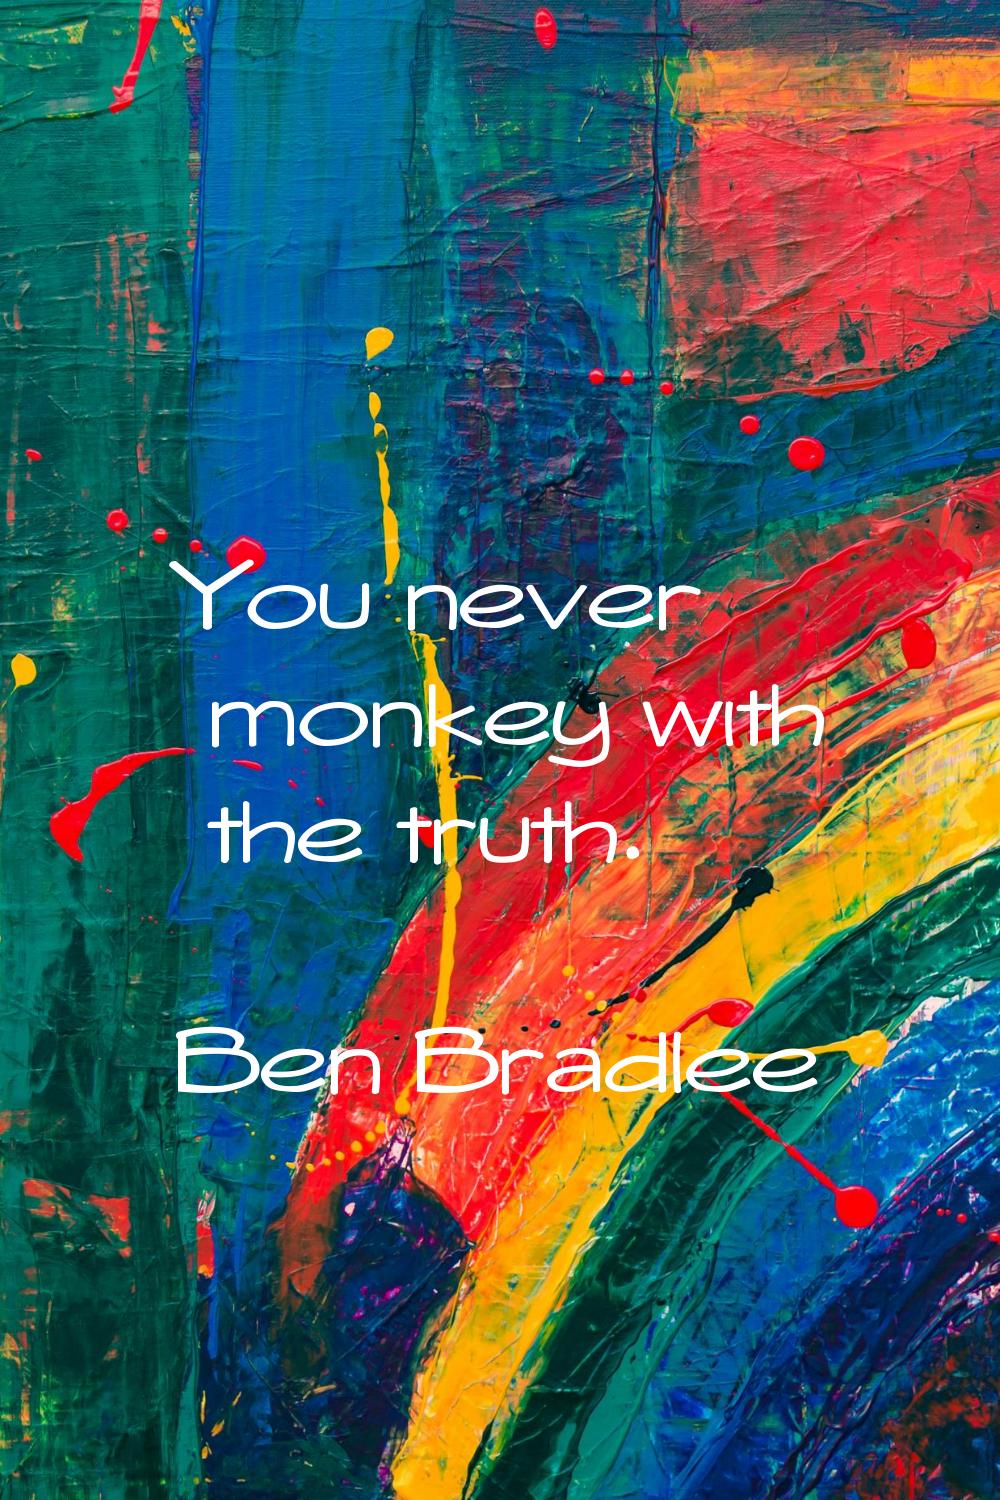 You never monkey with the truth.